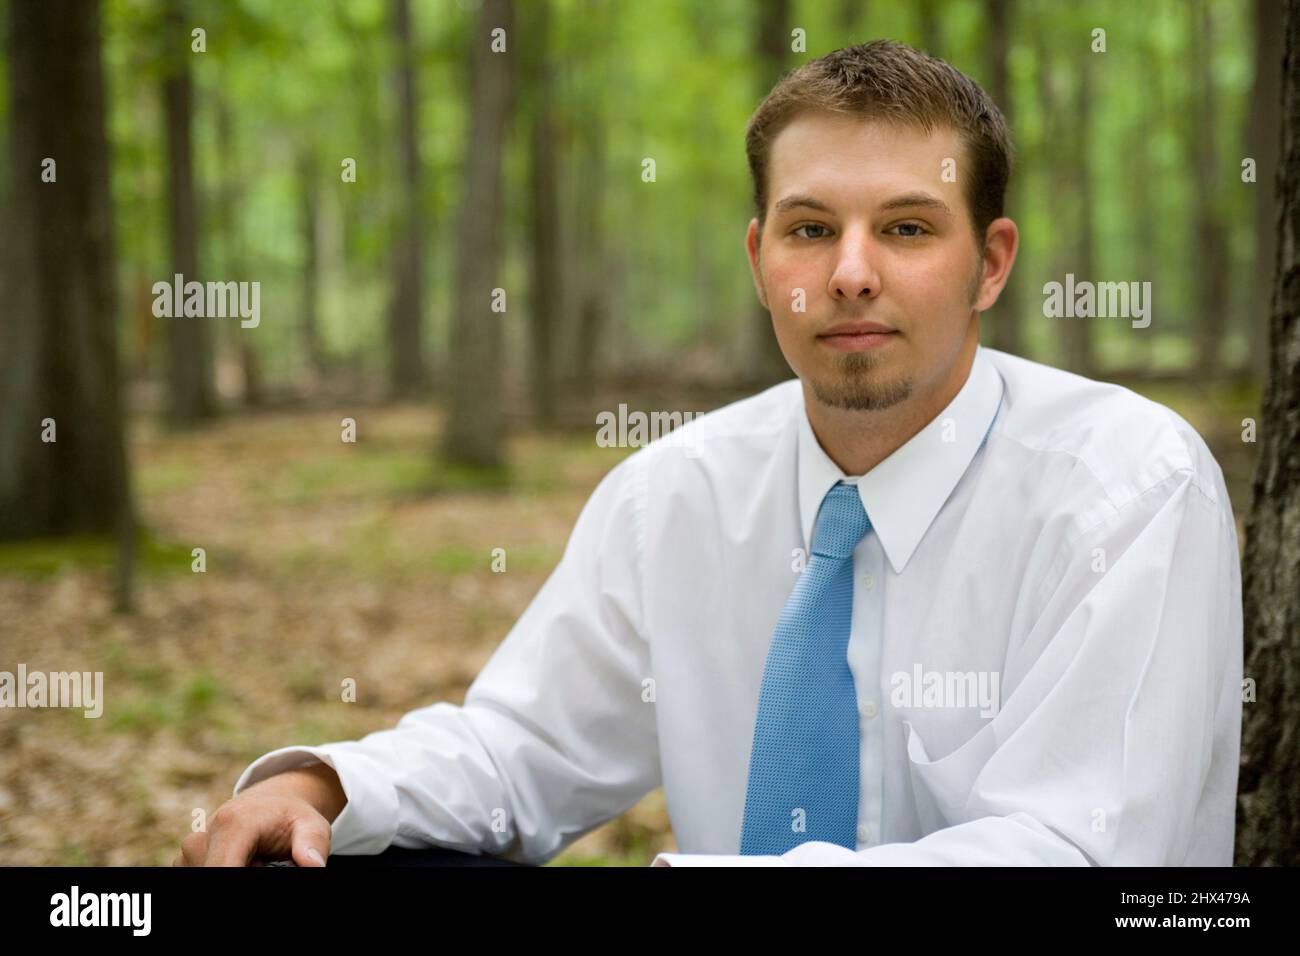 PORTRAIT OF SERIOUS YOUNG BUSINESSMAN SITTING IN TEMPERATE MIXED NORTHERN FOREST Stock Photo